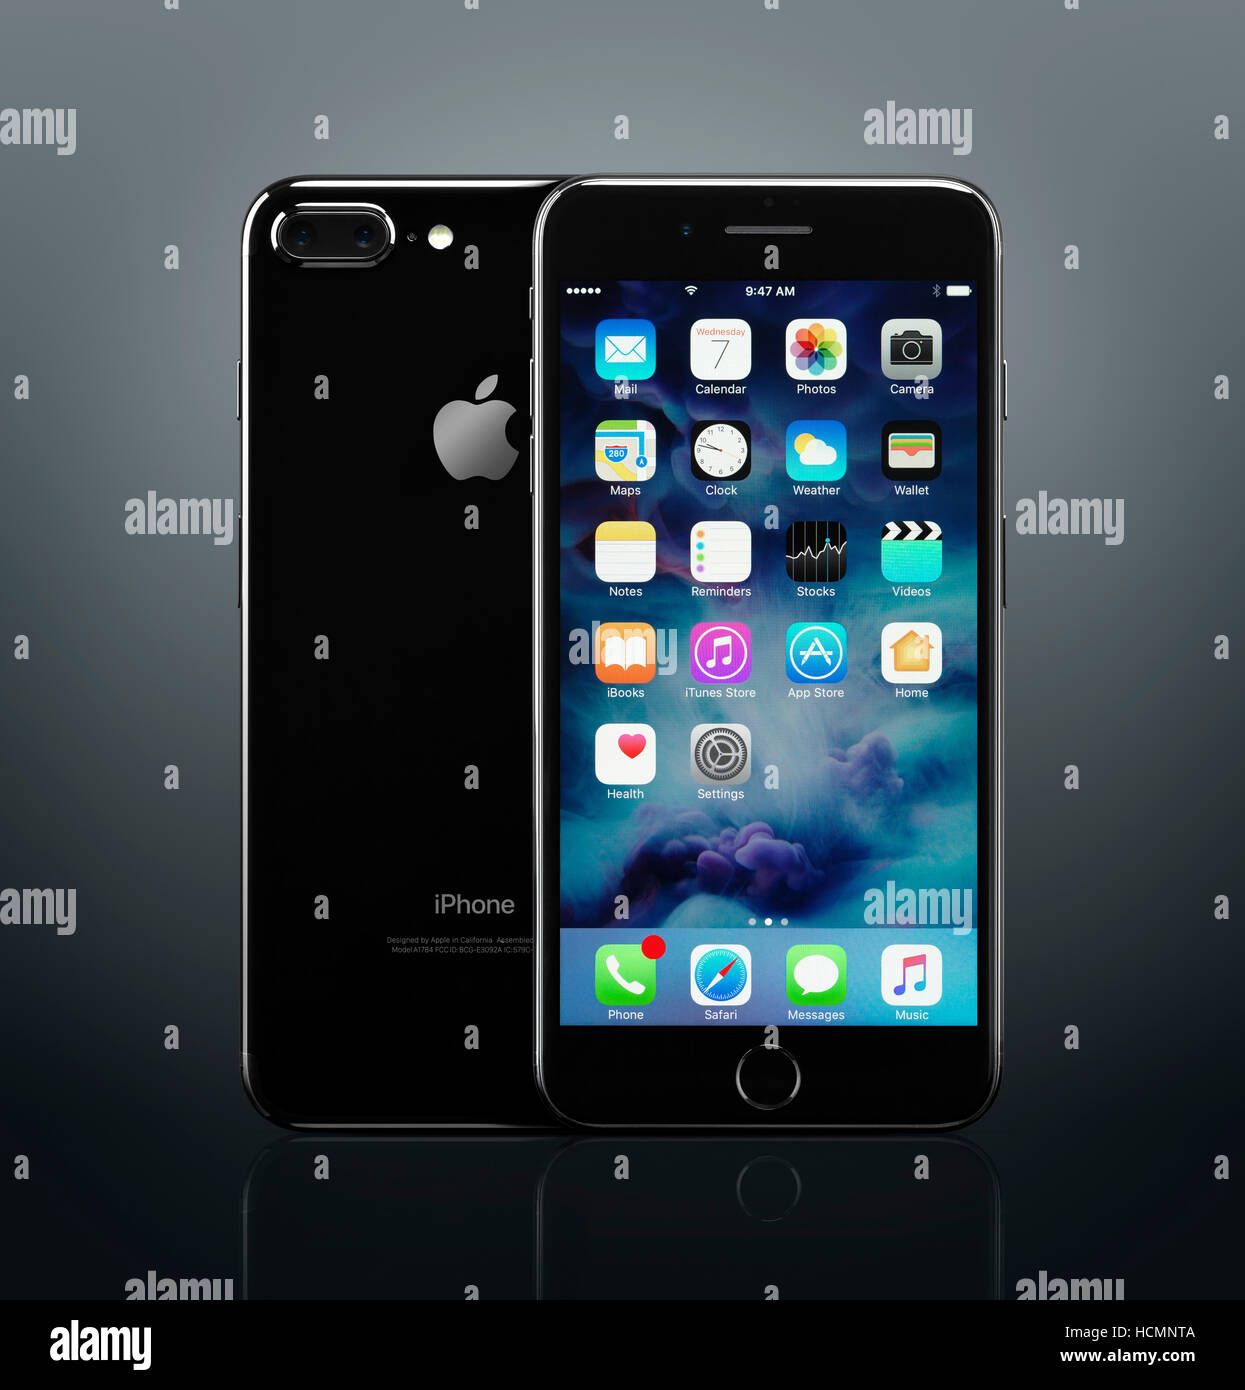 Apple iPhone 7 Plus black front and back with desktop icons on its display isolated on dark gray background Stock Photo